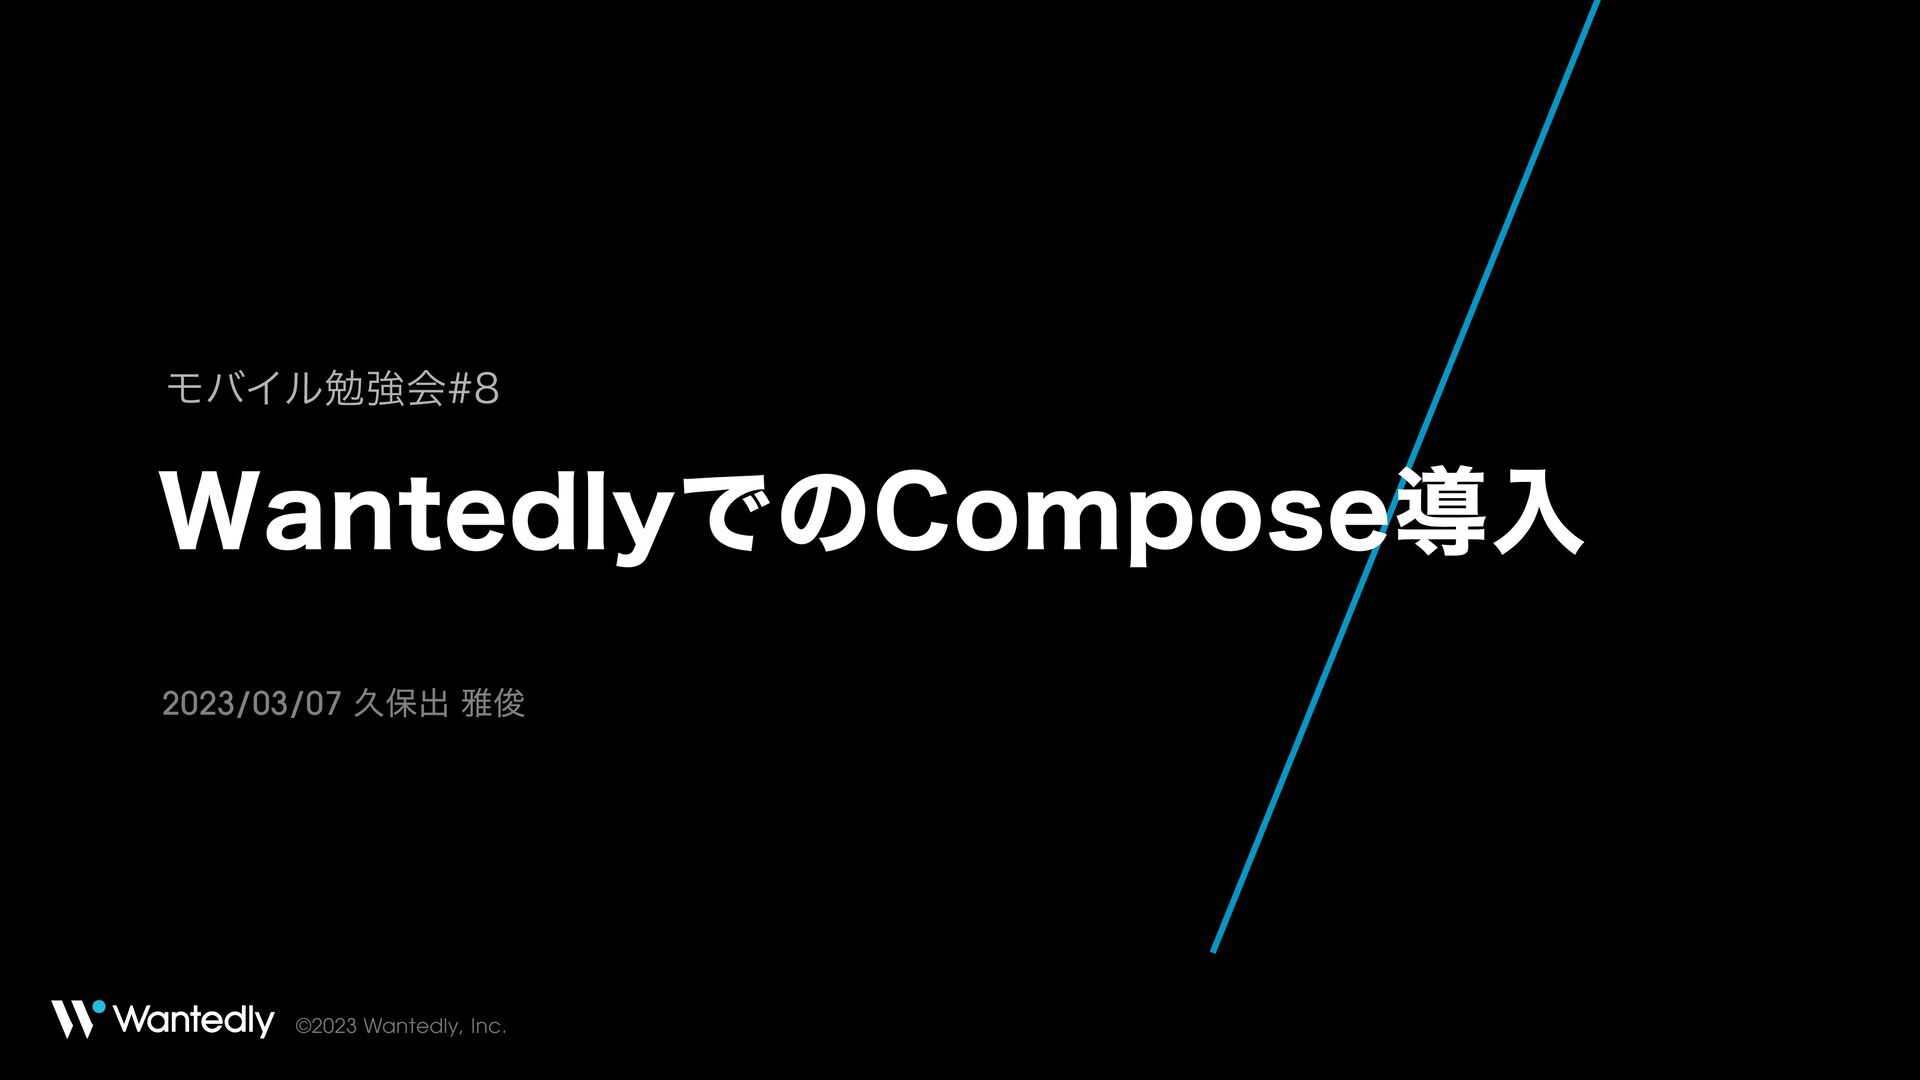 WantedlyでのCompose導入 / Introducing Jetpack Compose at Wantedly